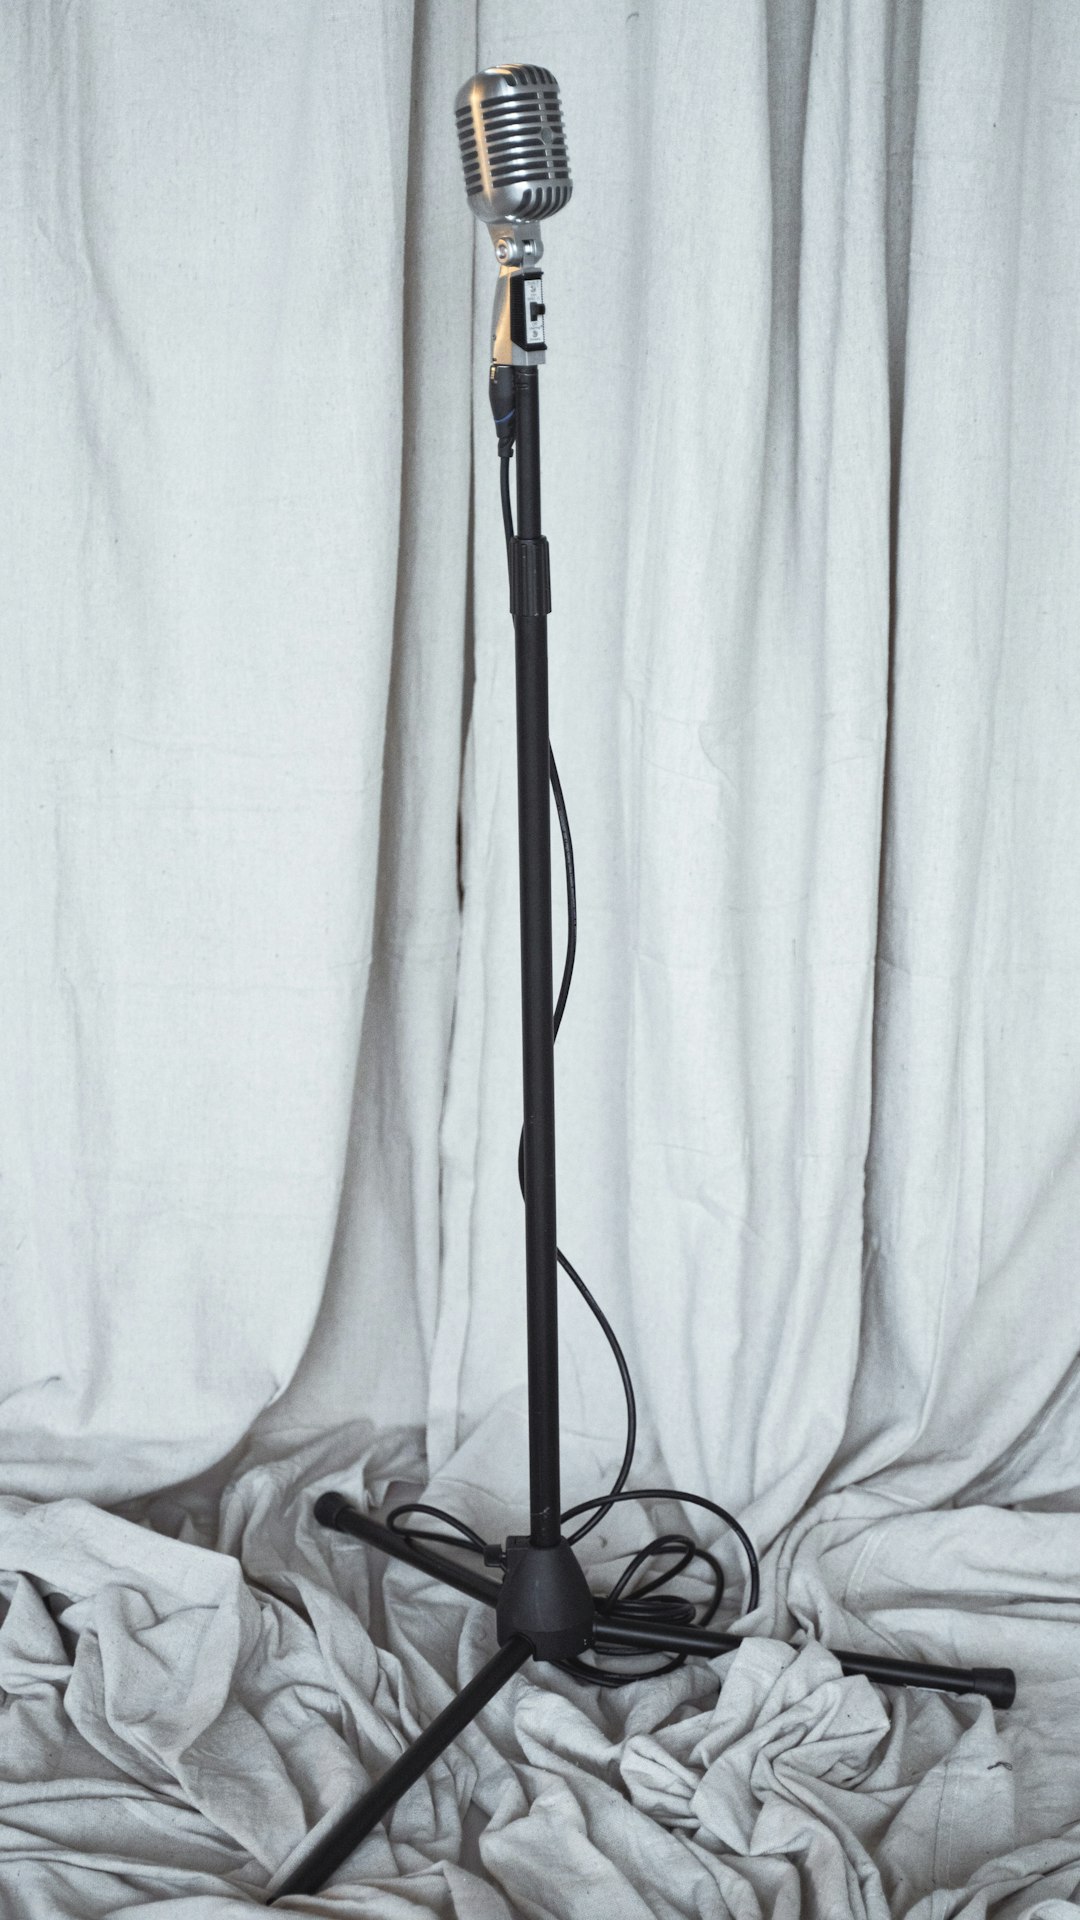 Vintage podcast microphone on a stand with a curtain background